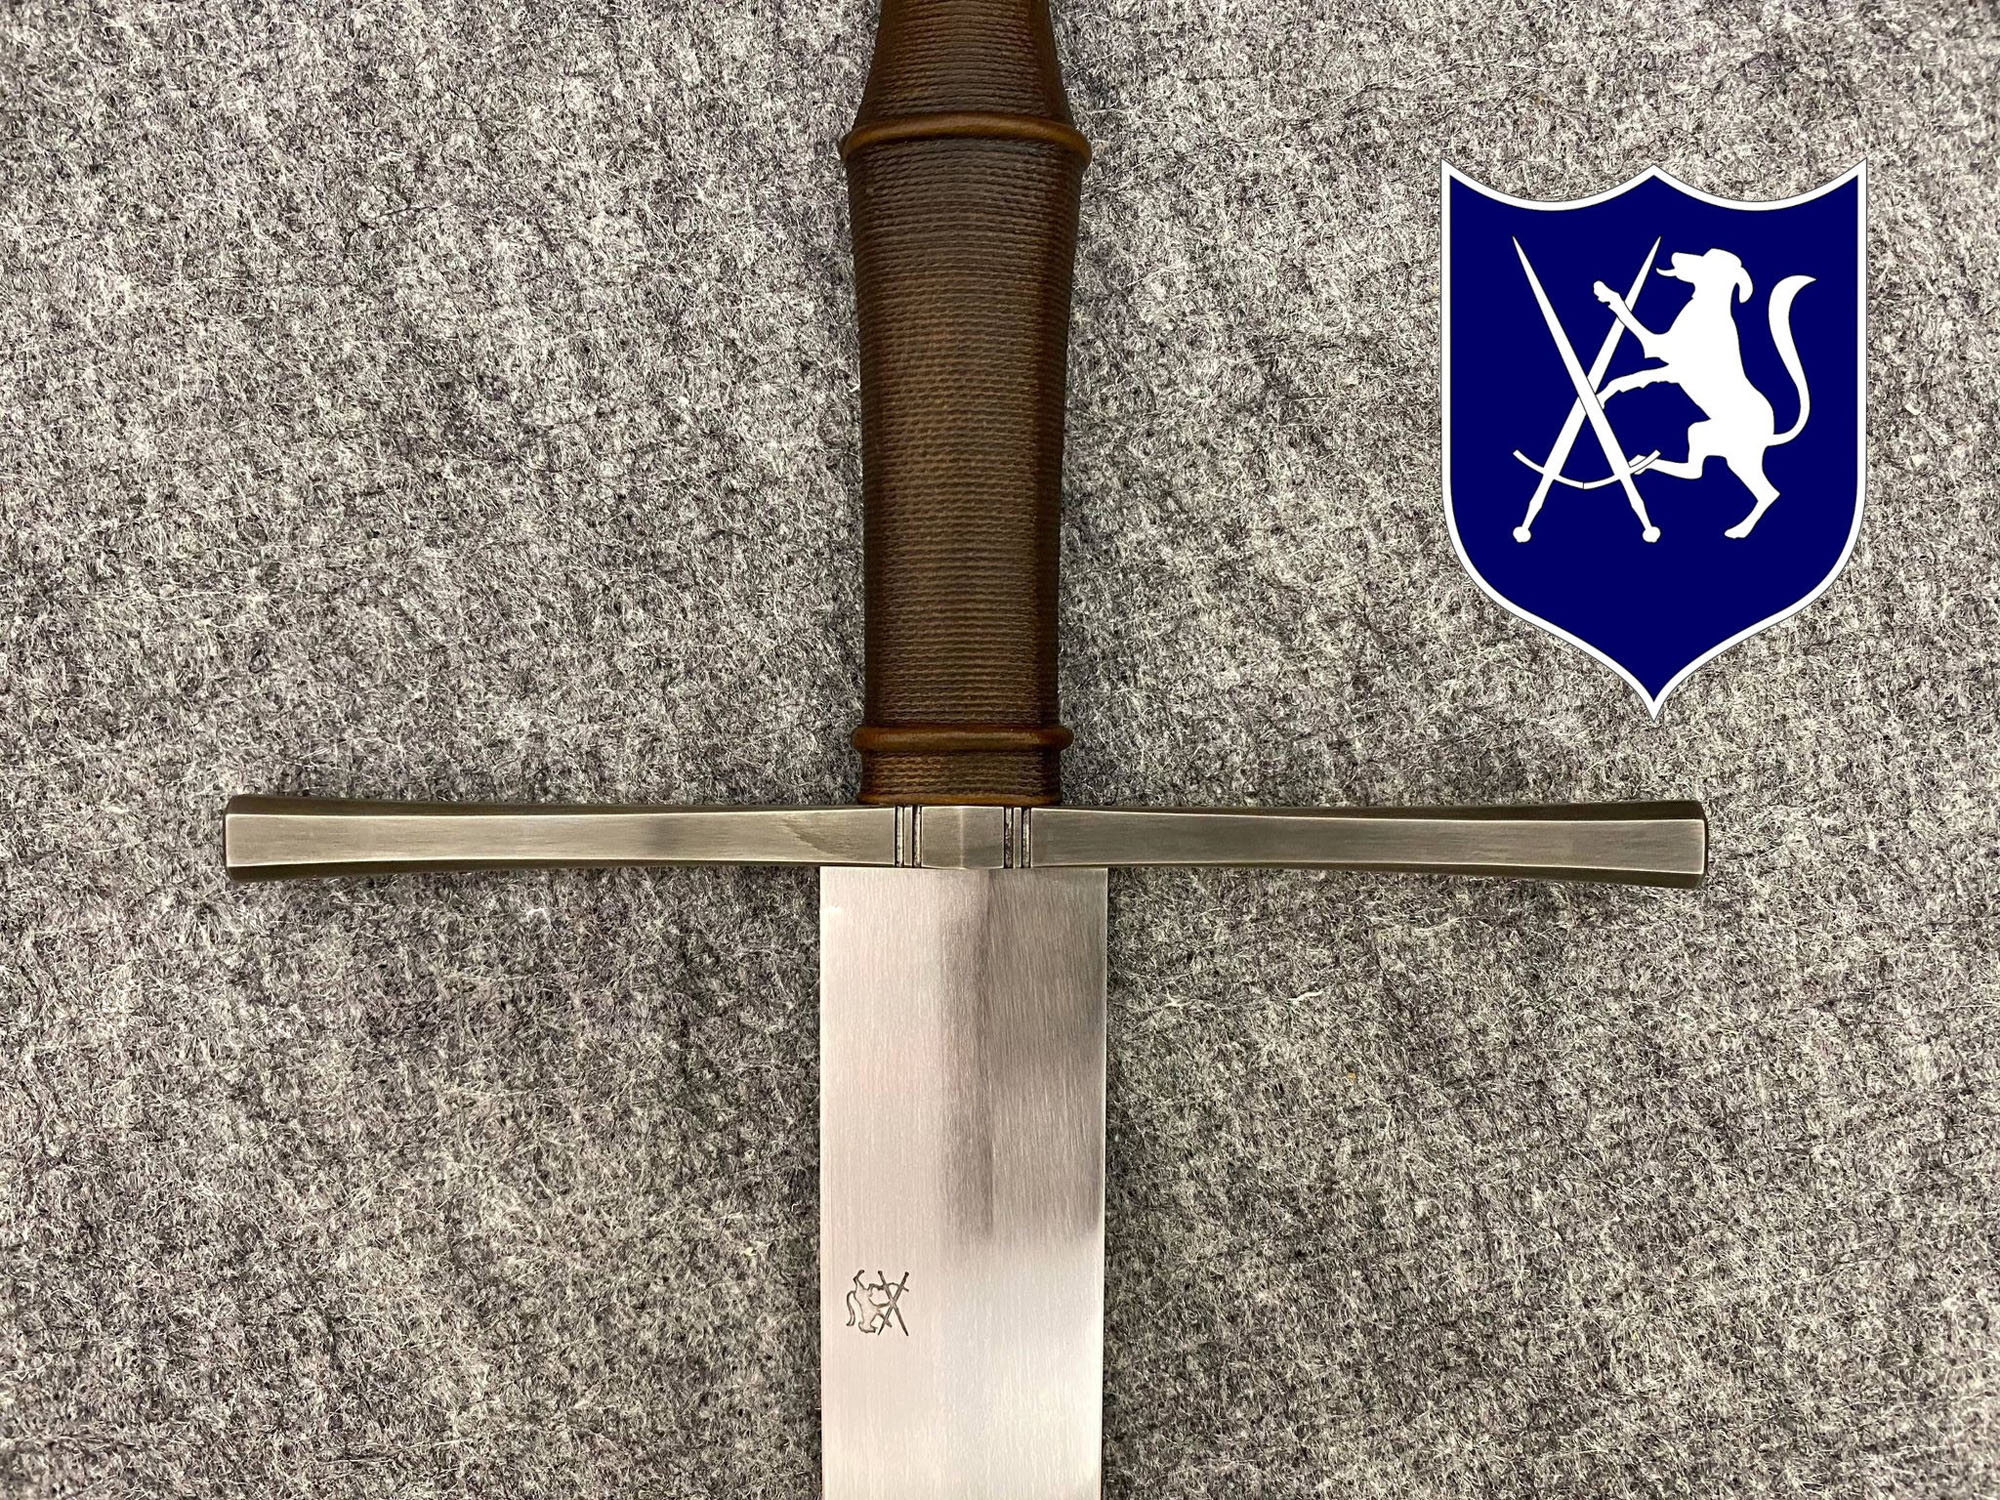 The Tauber Sword, Handforged and sharp blade